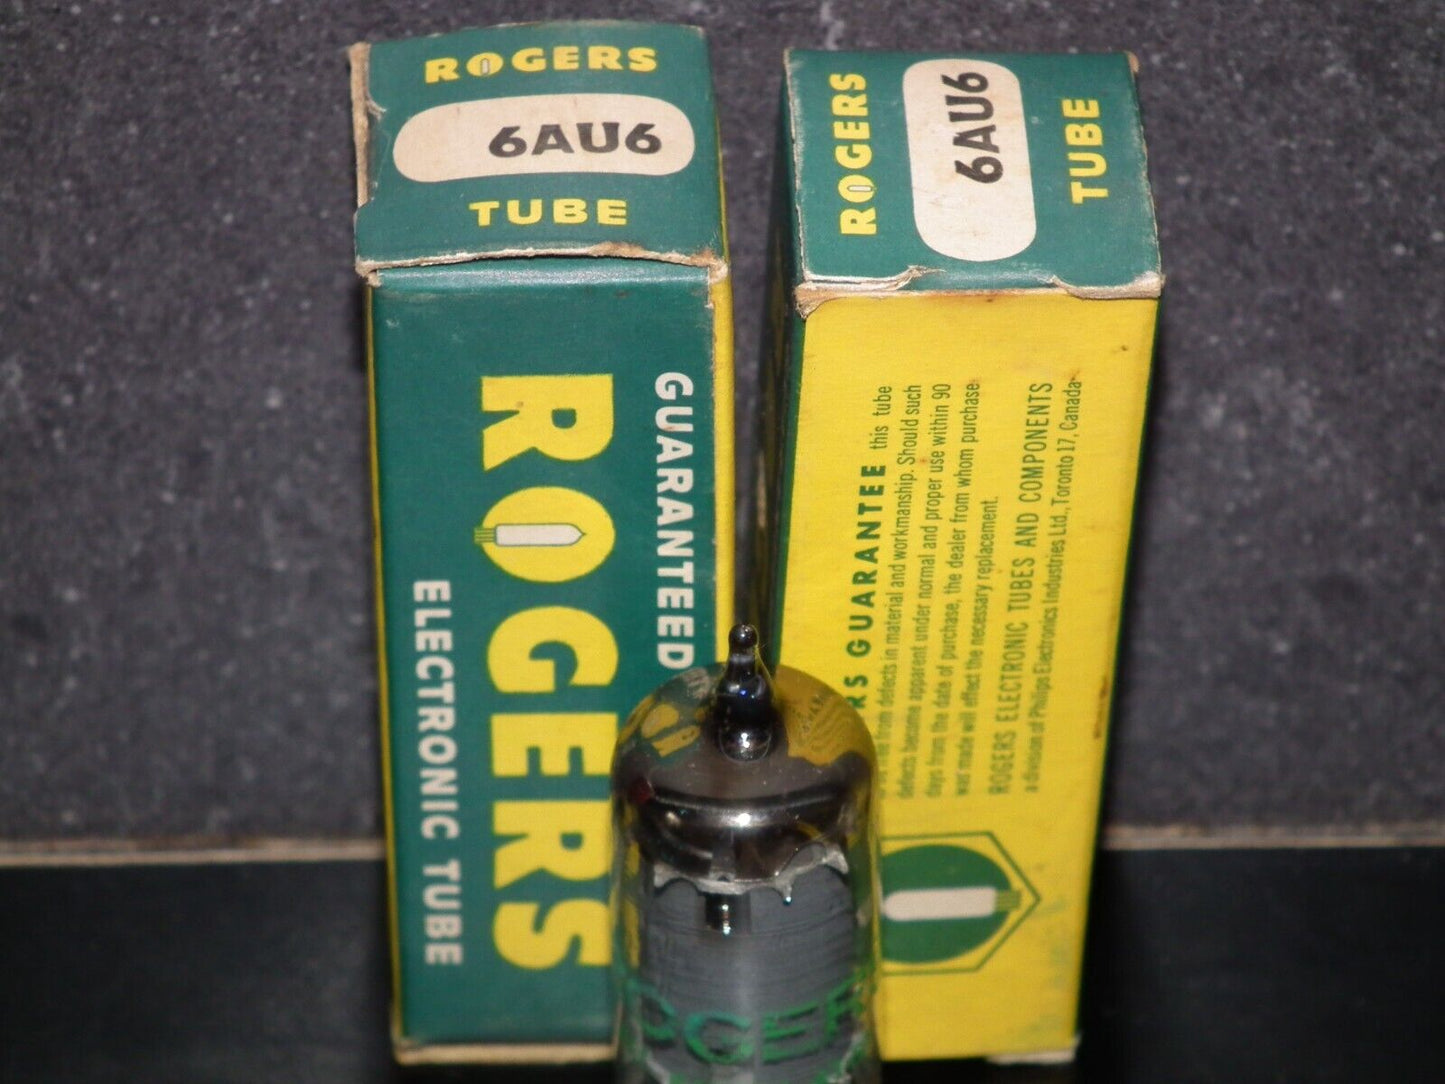 6AU6A Rogers EF94 Microphone pentode Low Noise Tested